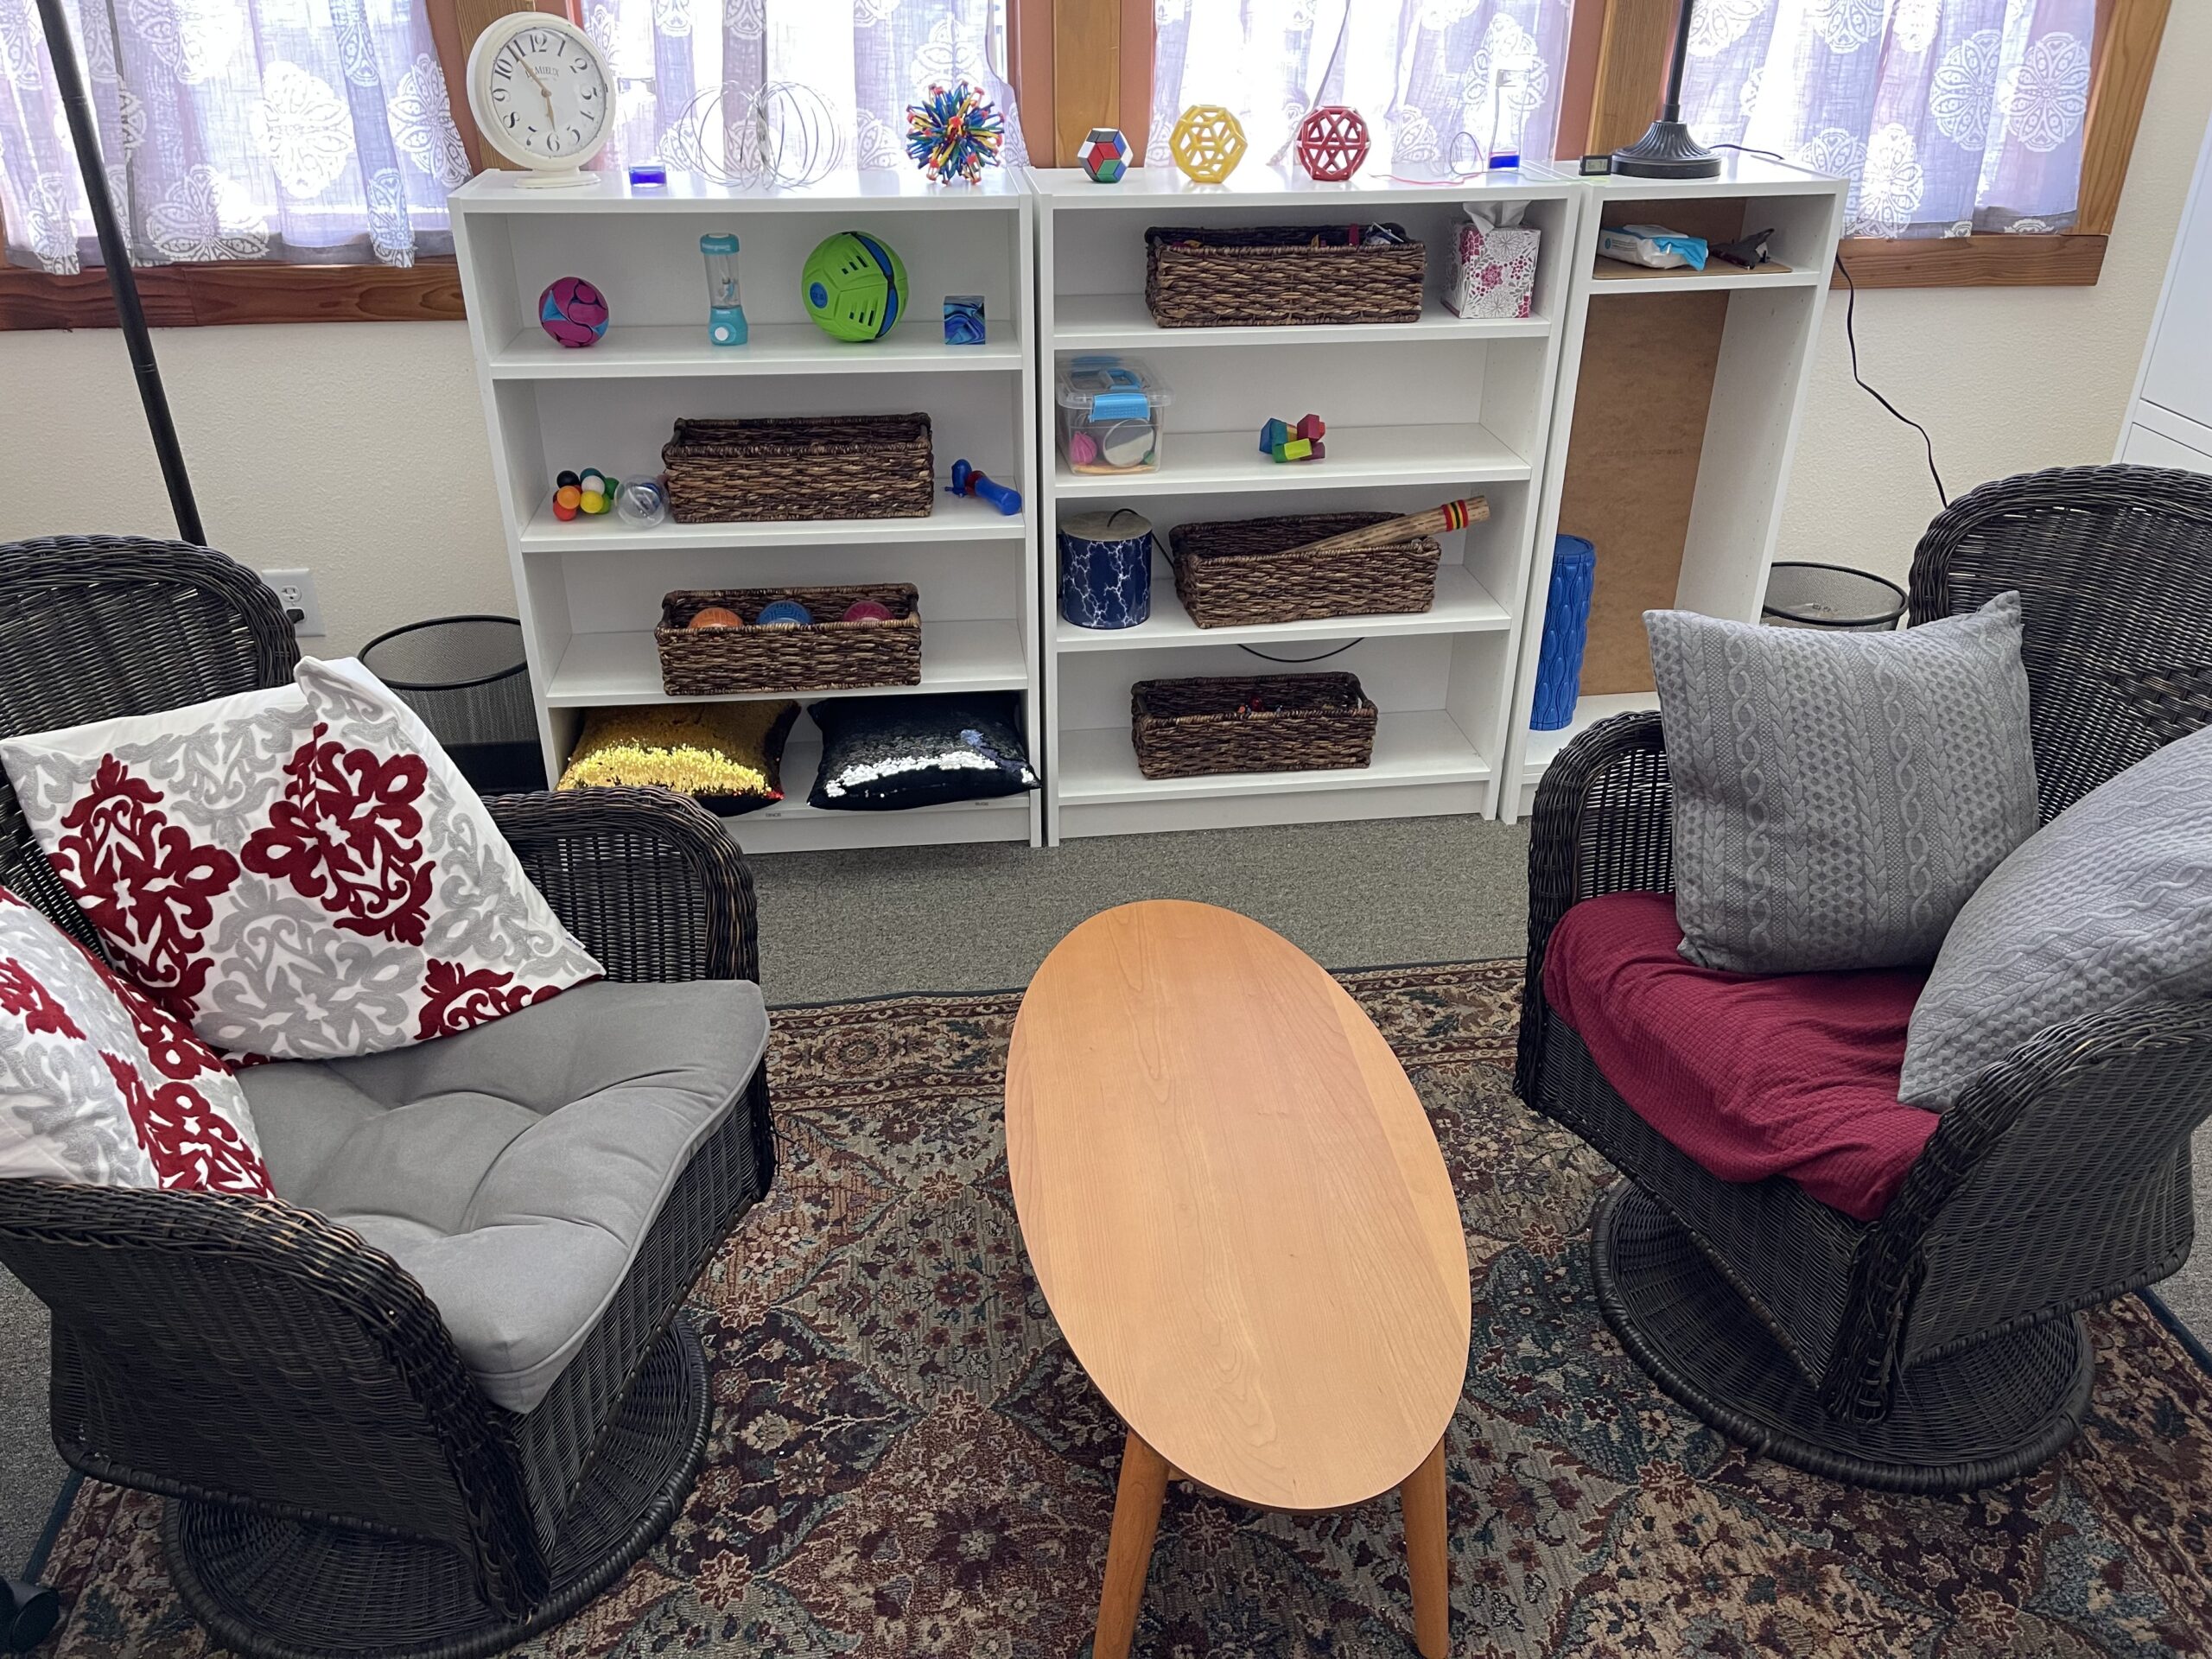 Image one of our rooms in the Campbell. It shows the toys and tools that are available for children when they come for neuropsychological testing, IQ testing, or psychoeducational testing.